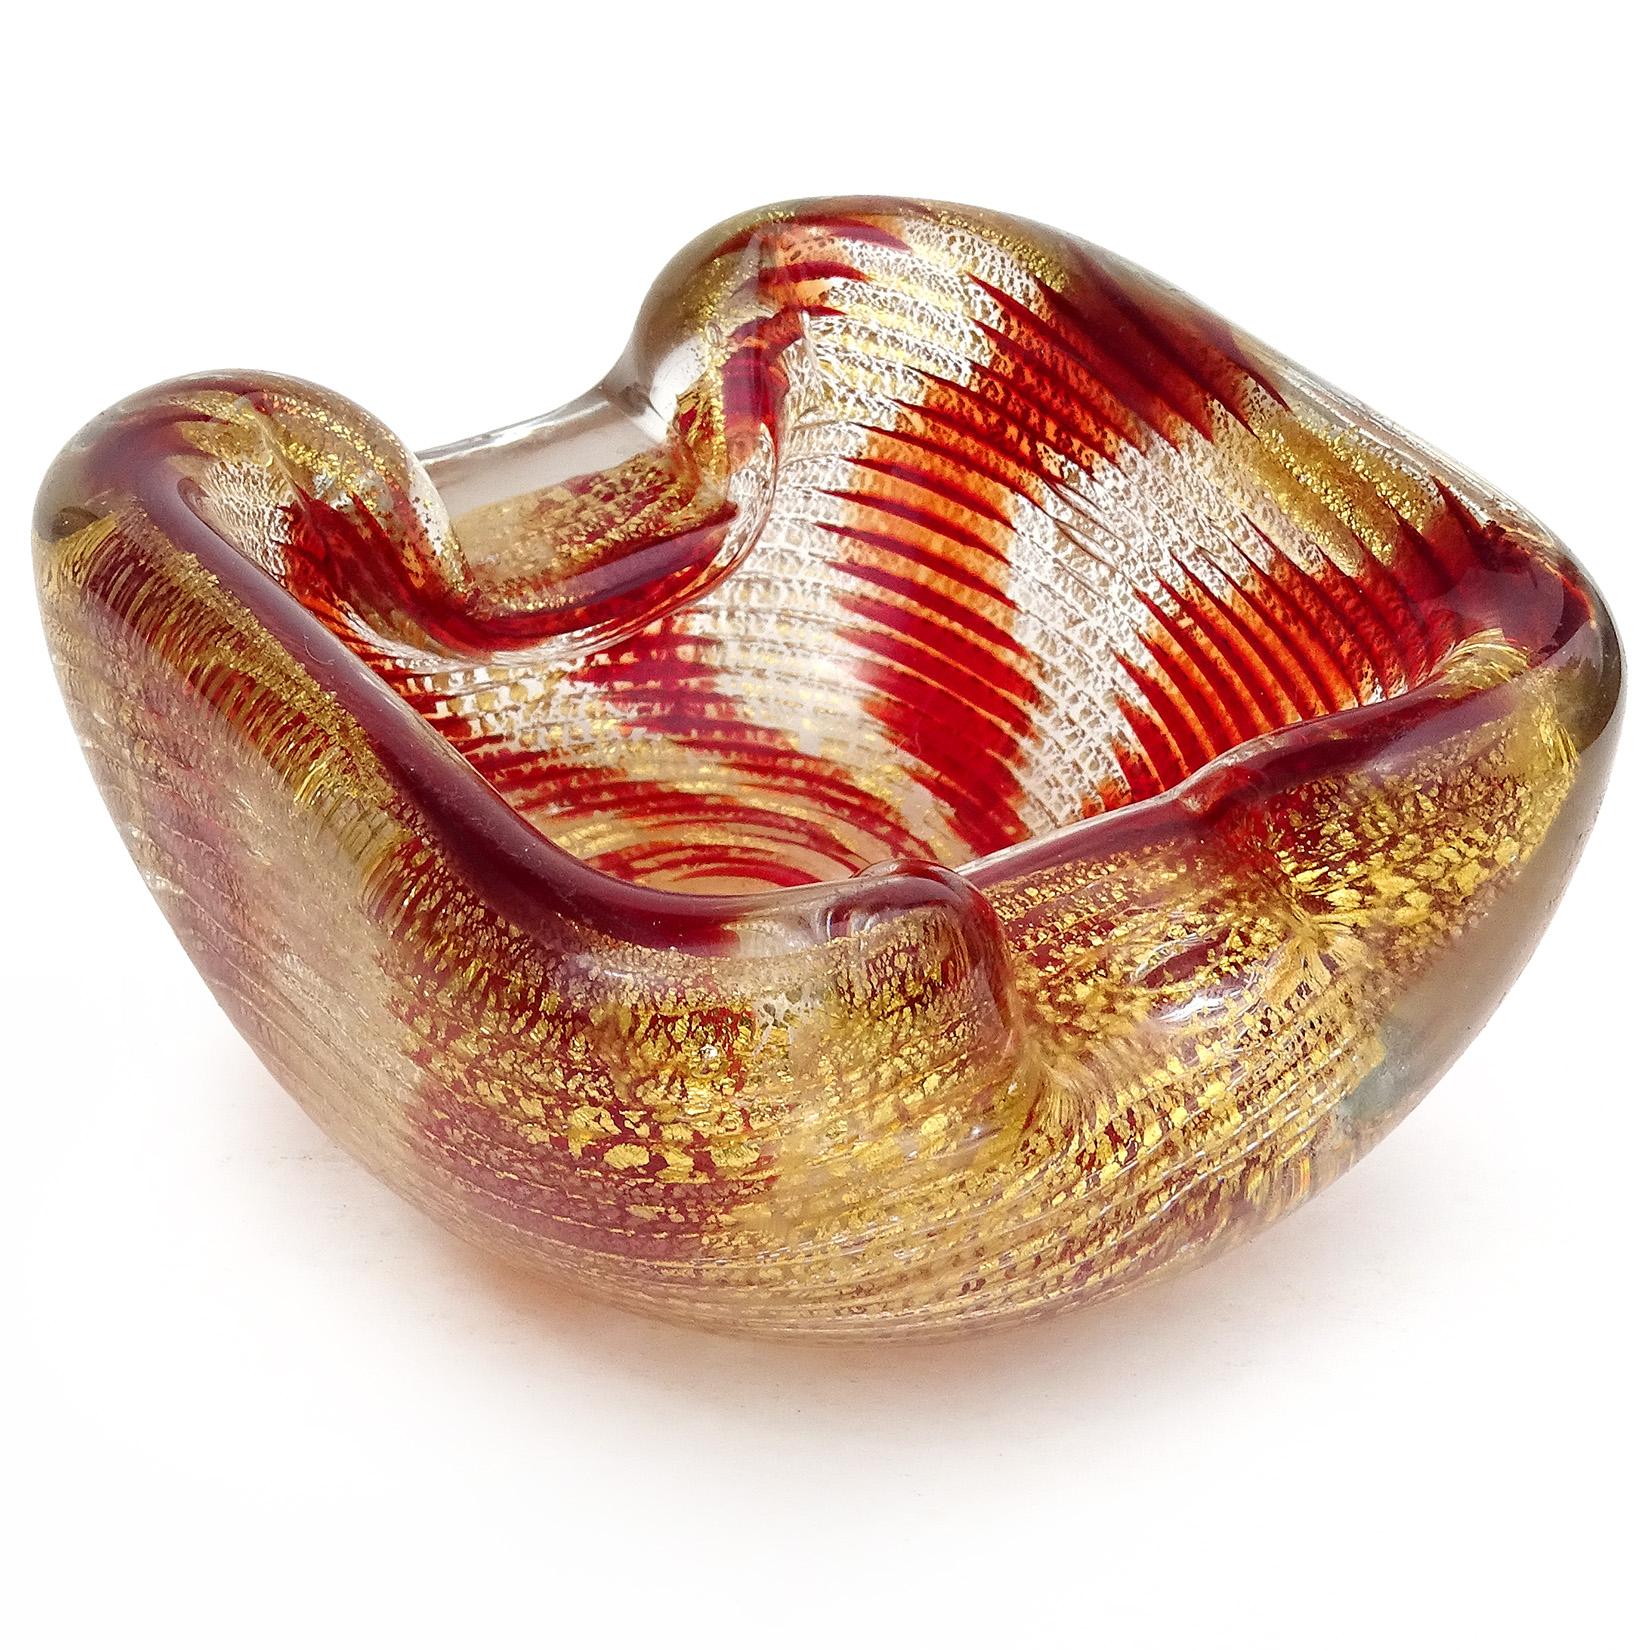 Beautiful vintage Murano hand blown red and gold flecks Italian art glass sculptural chunky vide-poche, bowl or ashtray. Attributed to the Barovier e Toso company. The bowl has a a very unique striped pattern, and an optic design with swirling red